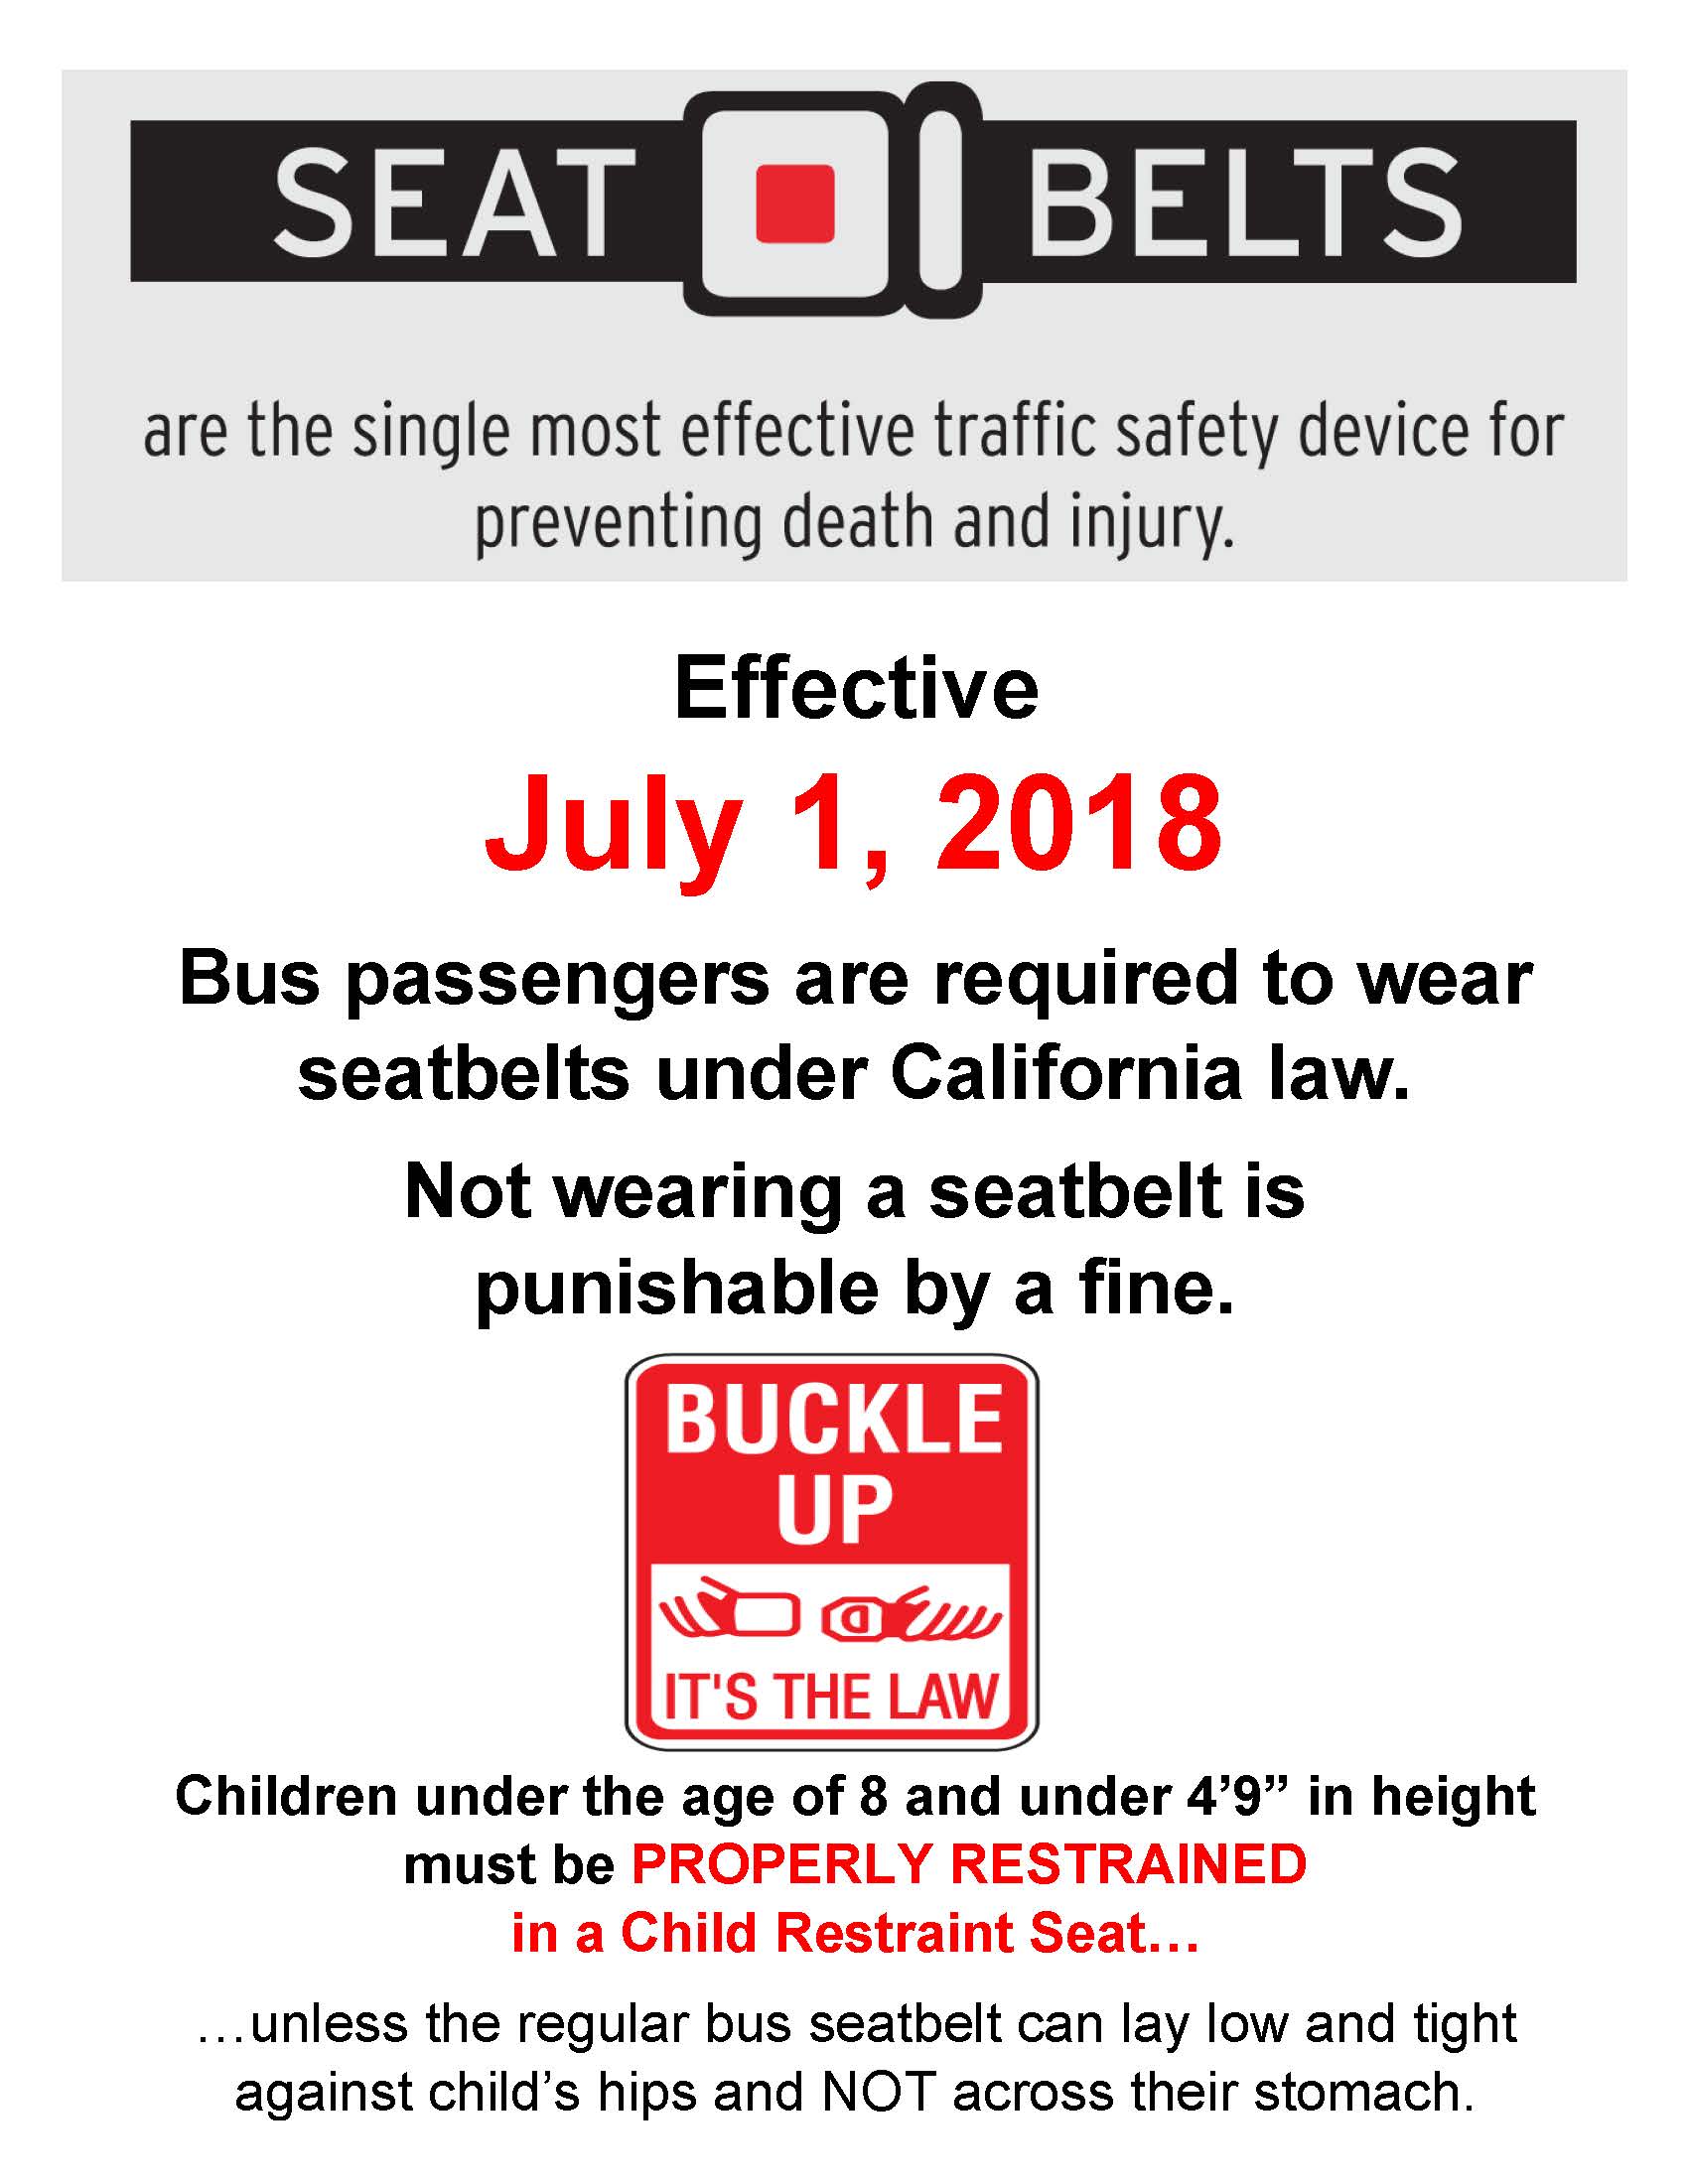 New California Seat Belt Law For Buses